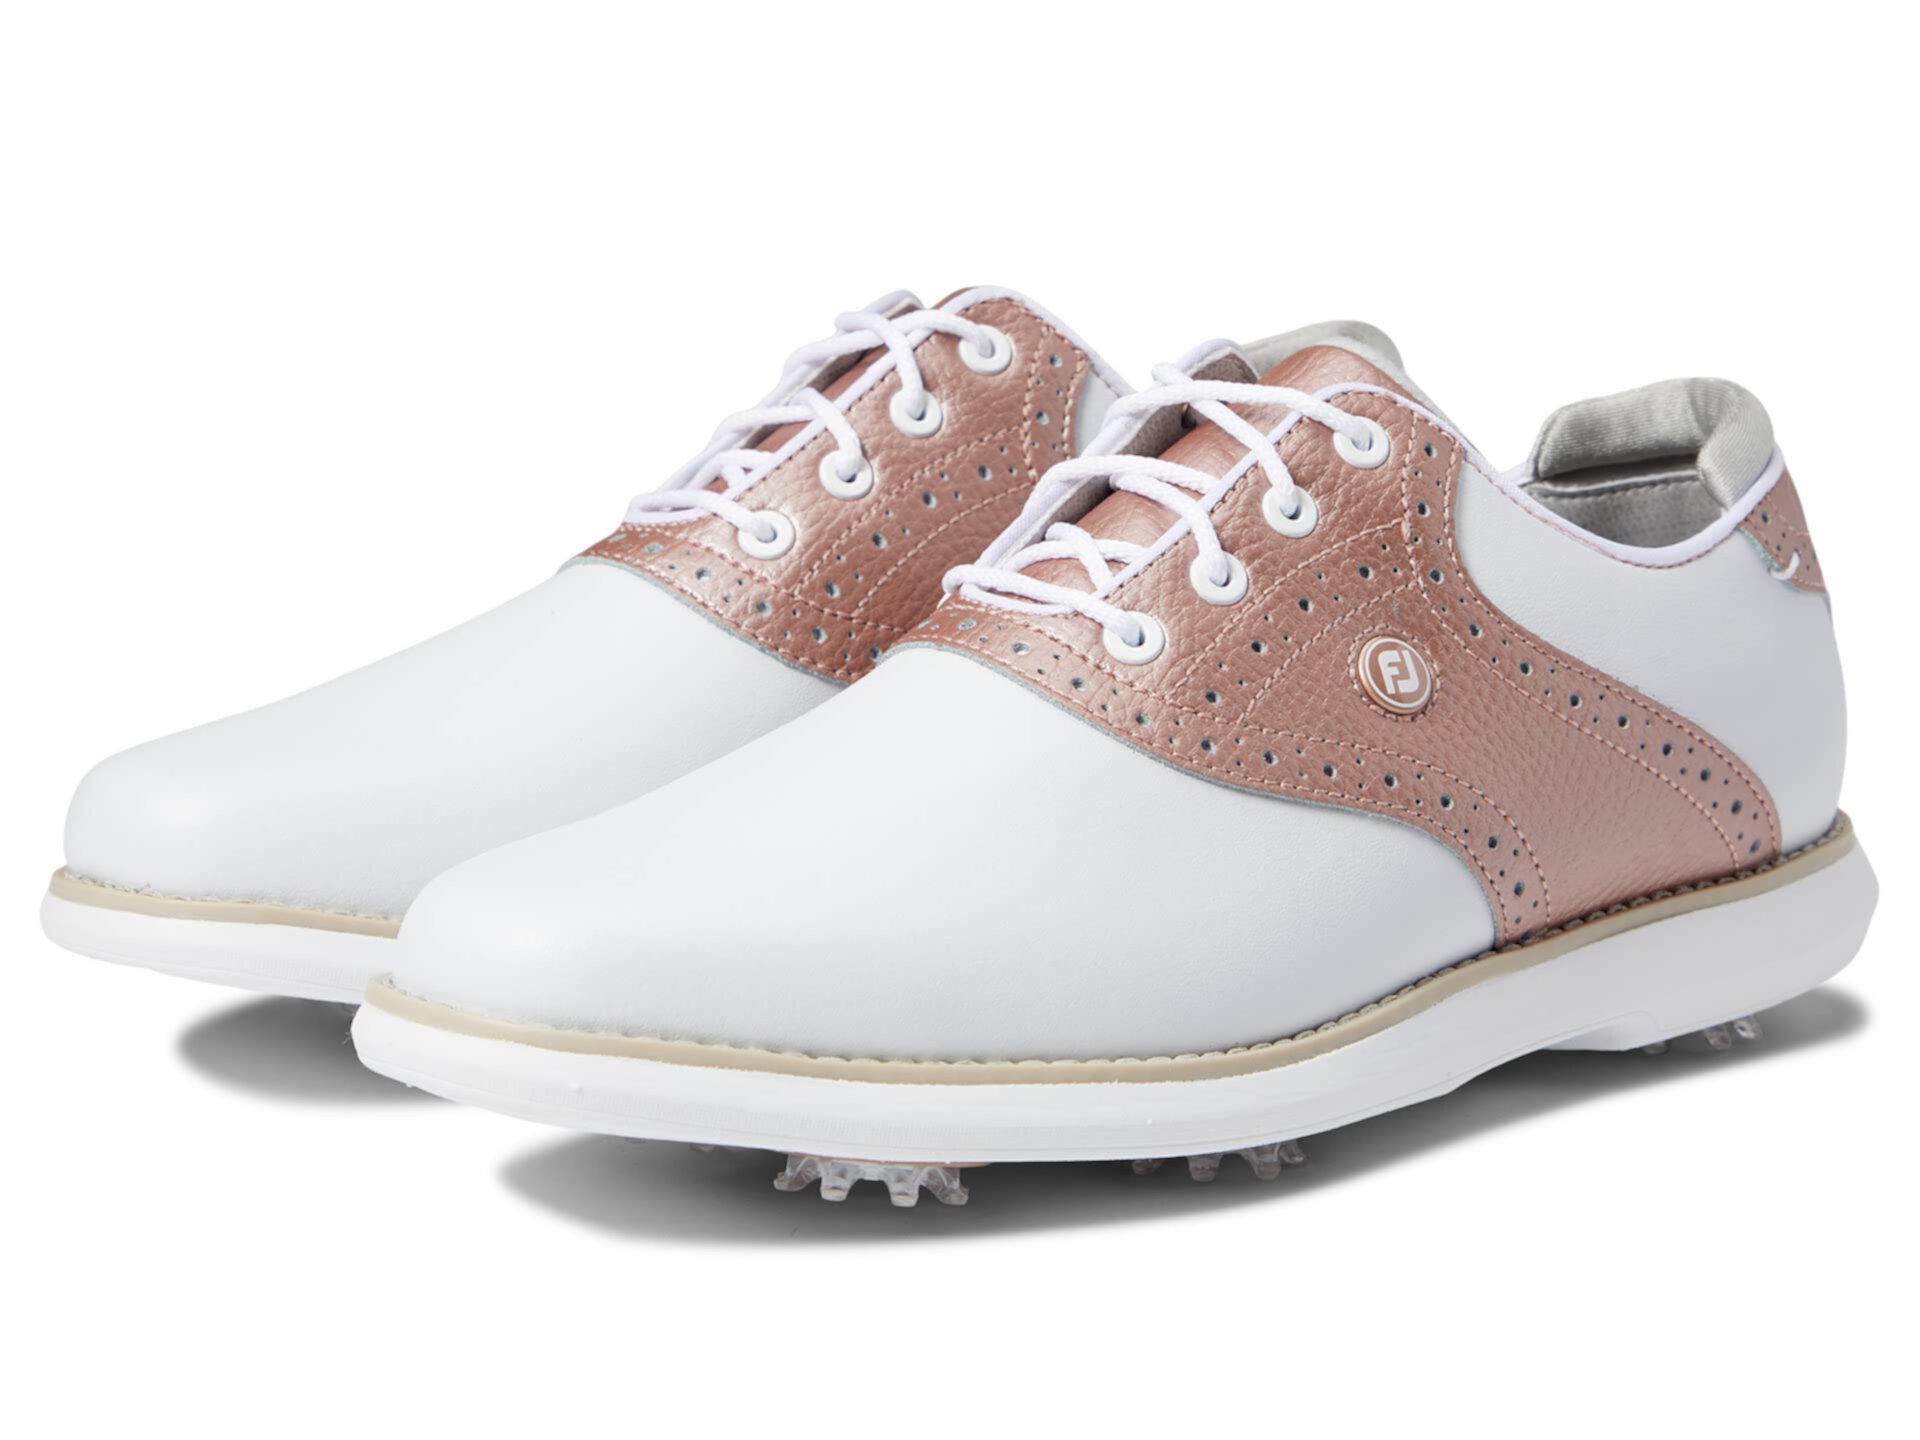 Traditions Golf Shoes - Previous Season Style FootJoy